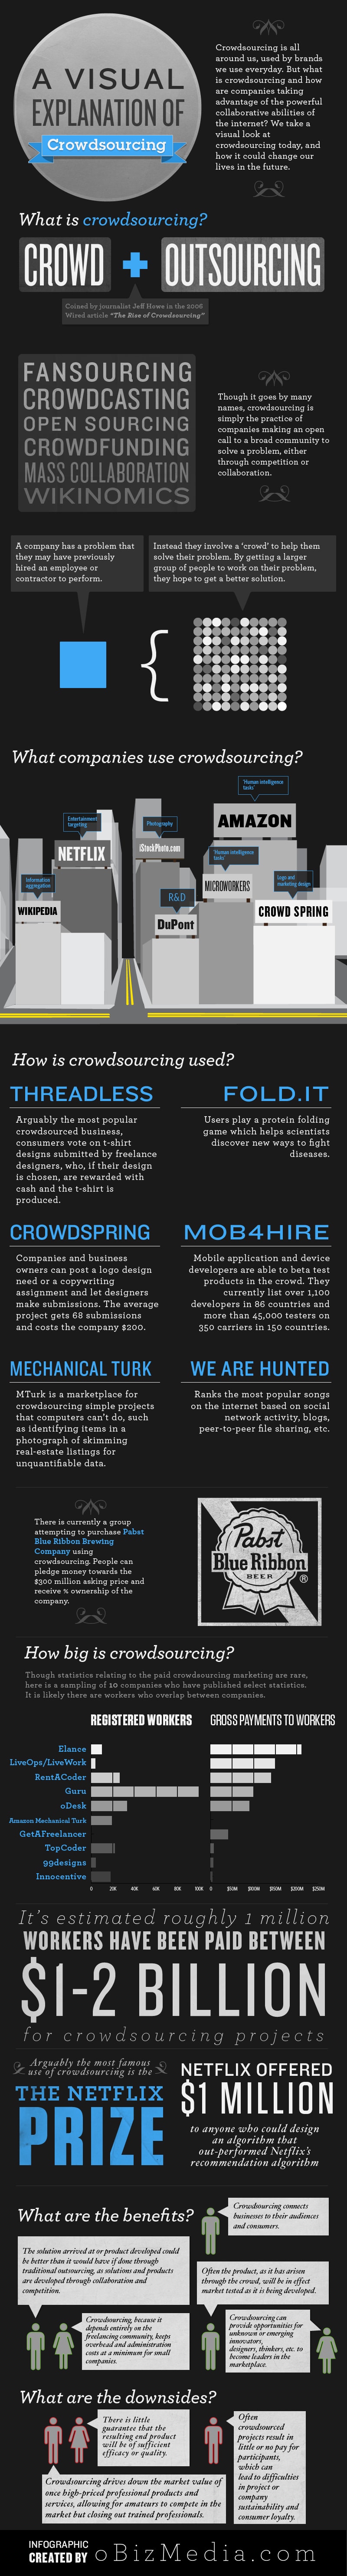 A Visual Explanation Of Crowdsourcing [Infographic]